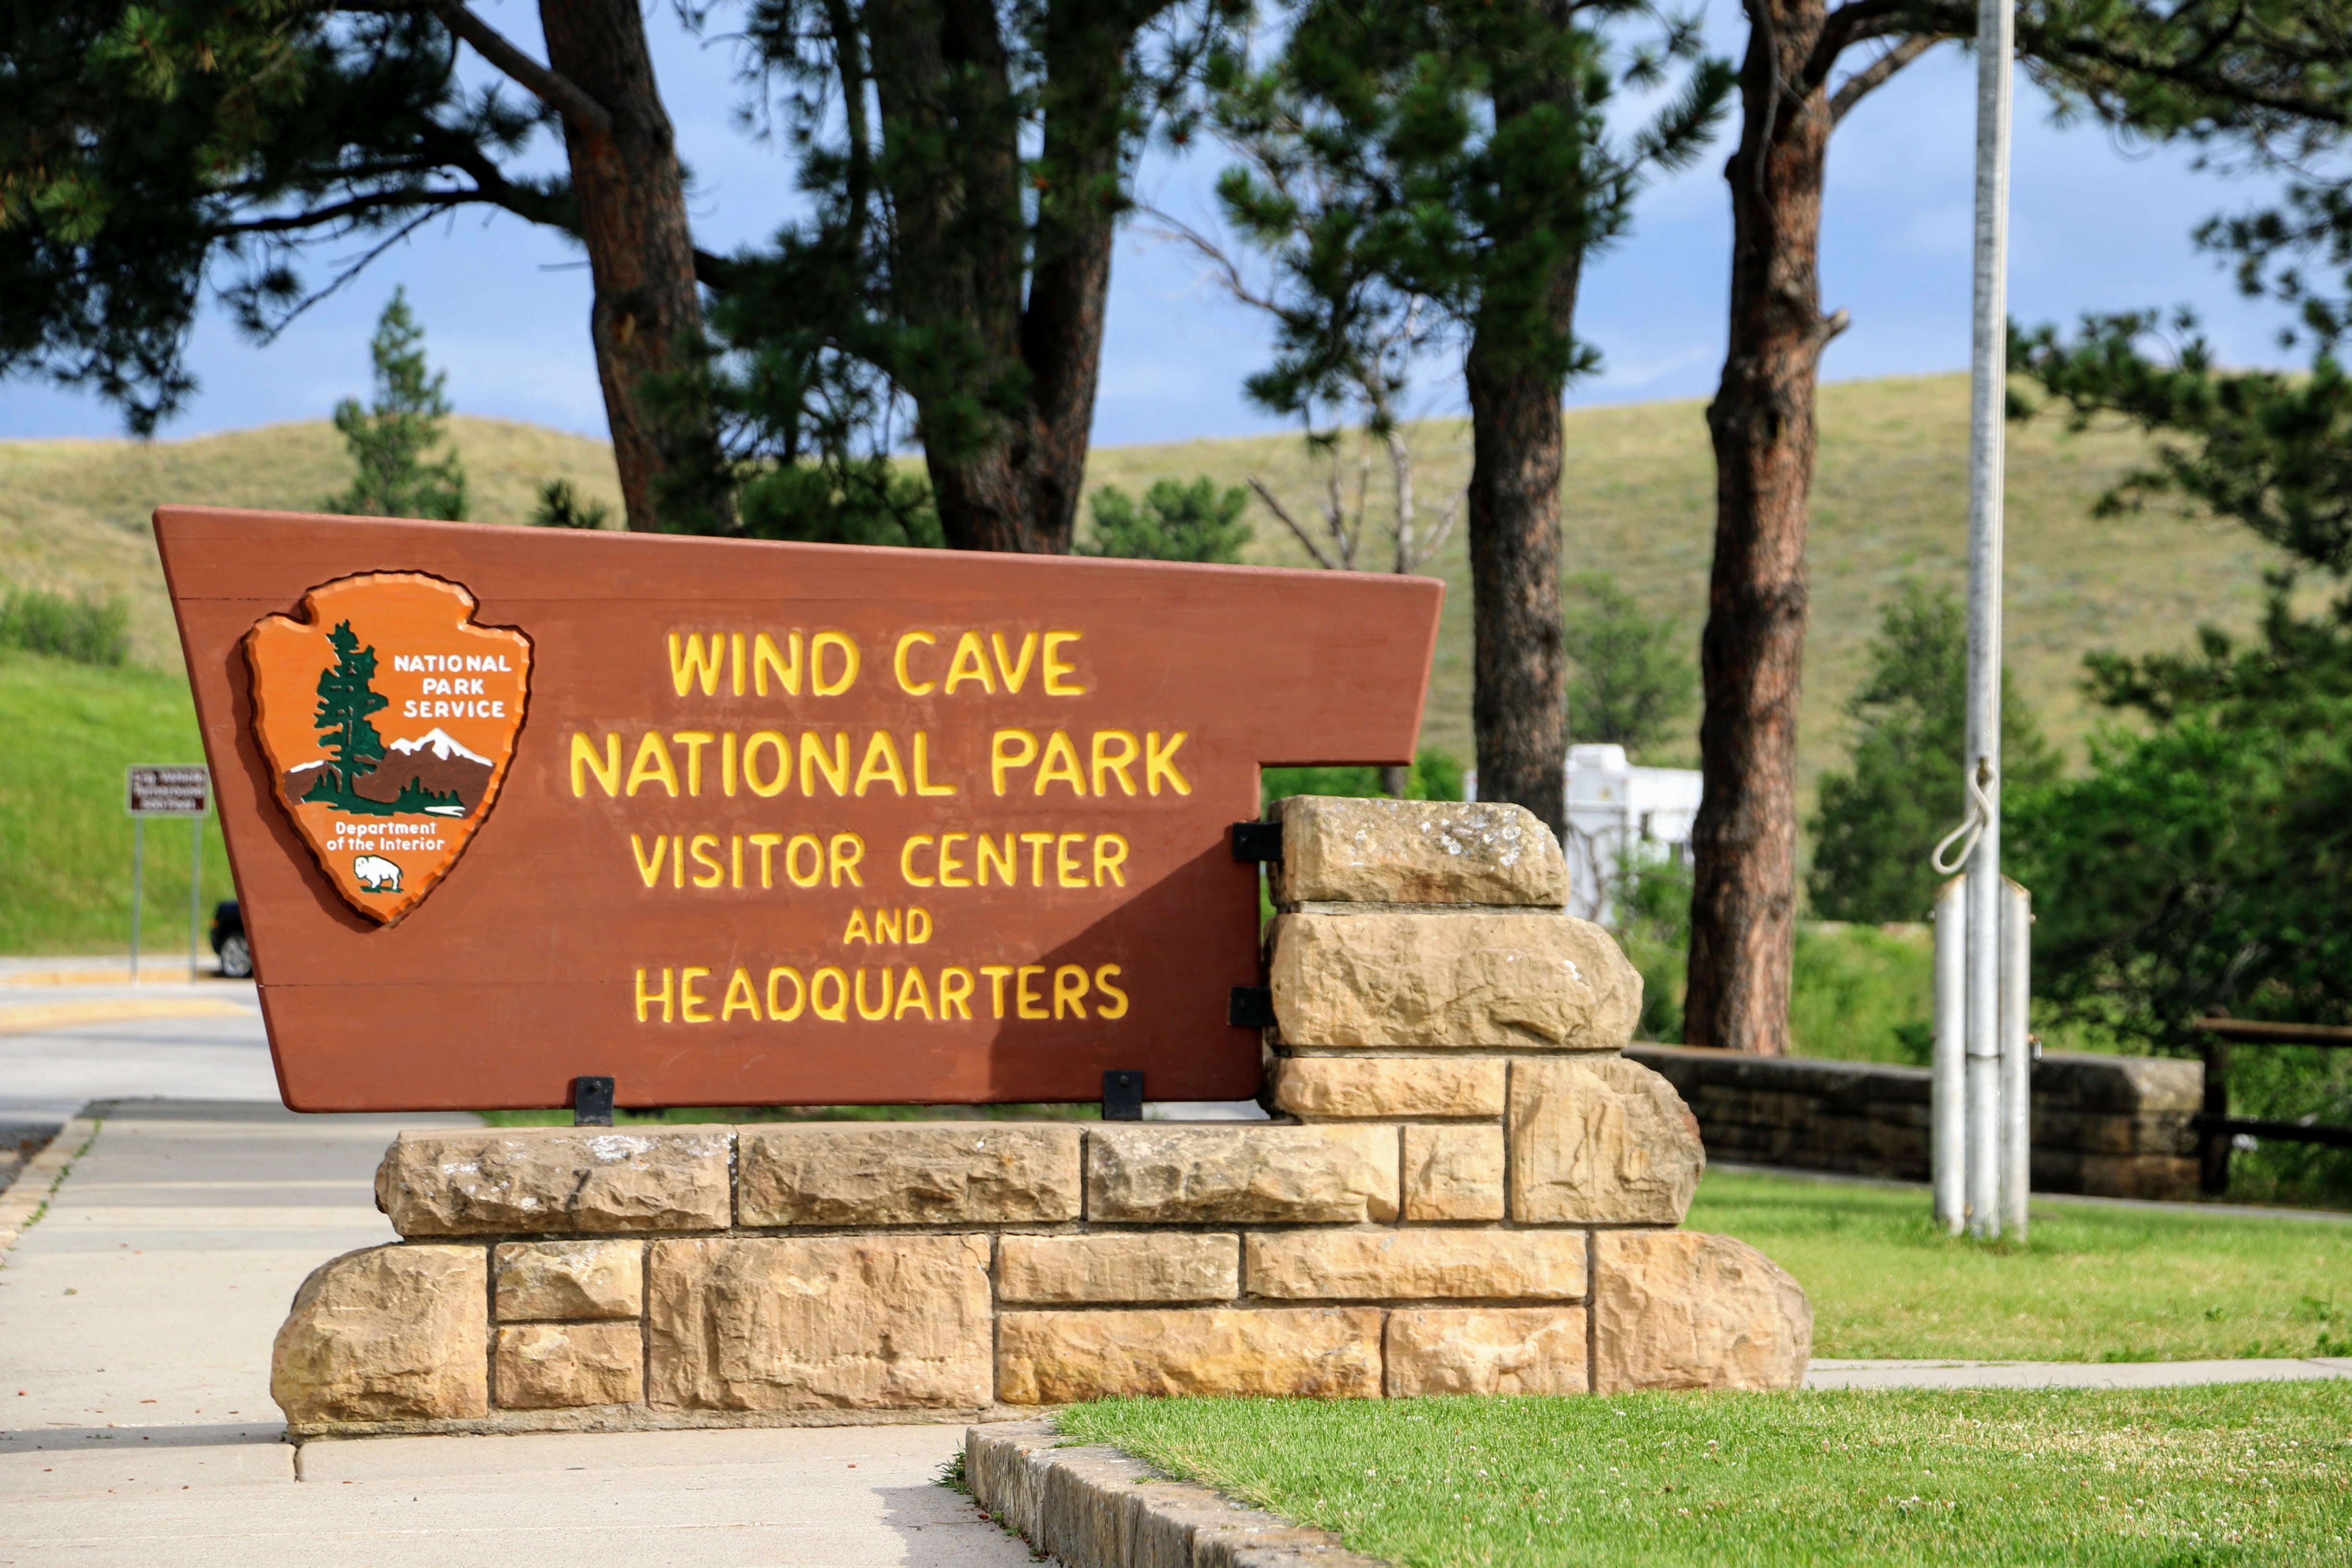 Wind Cave National Park Visitor Center and Headquarters